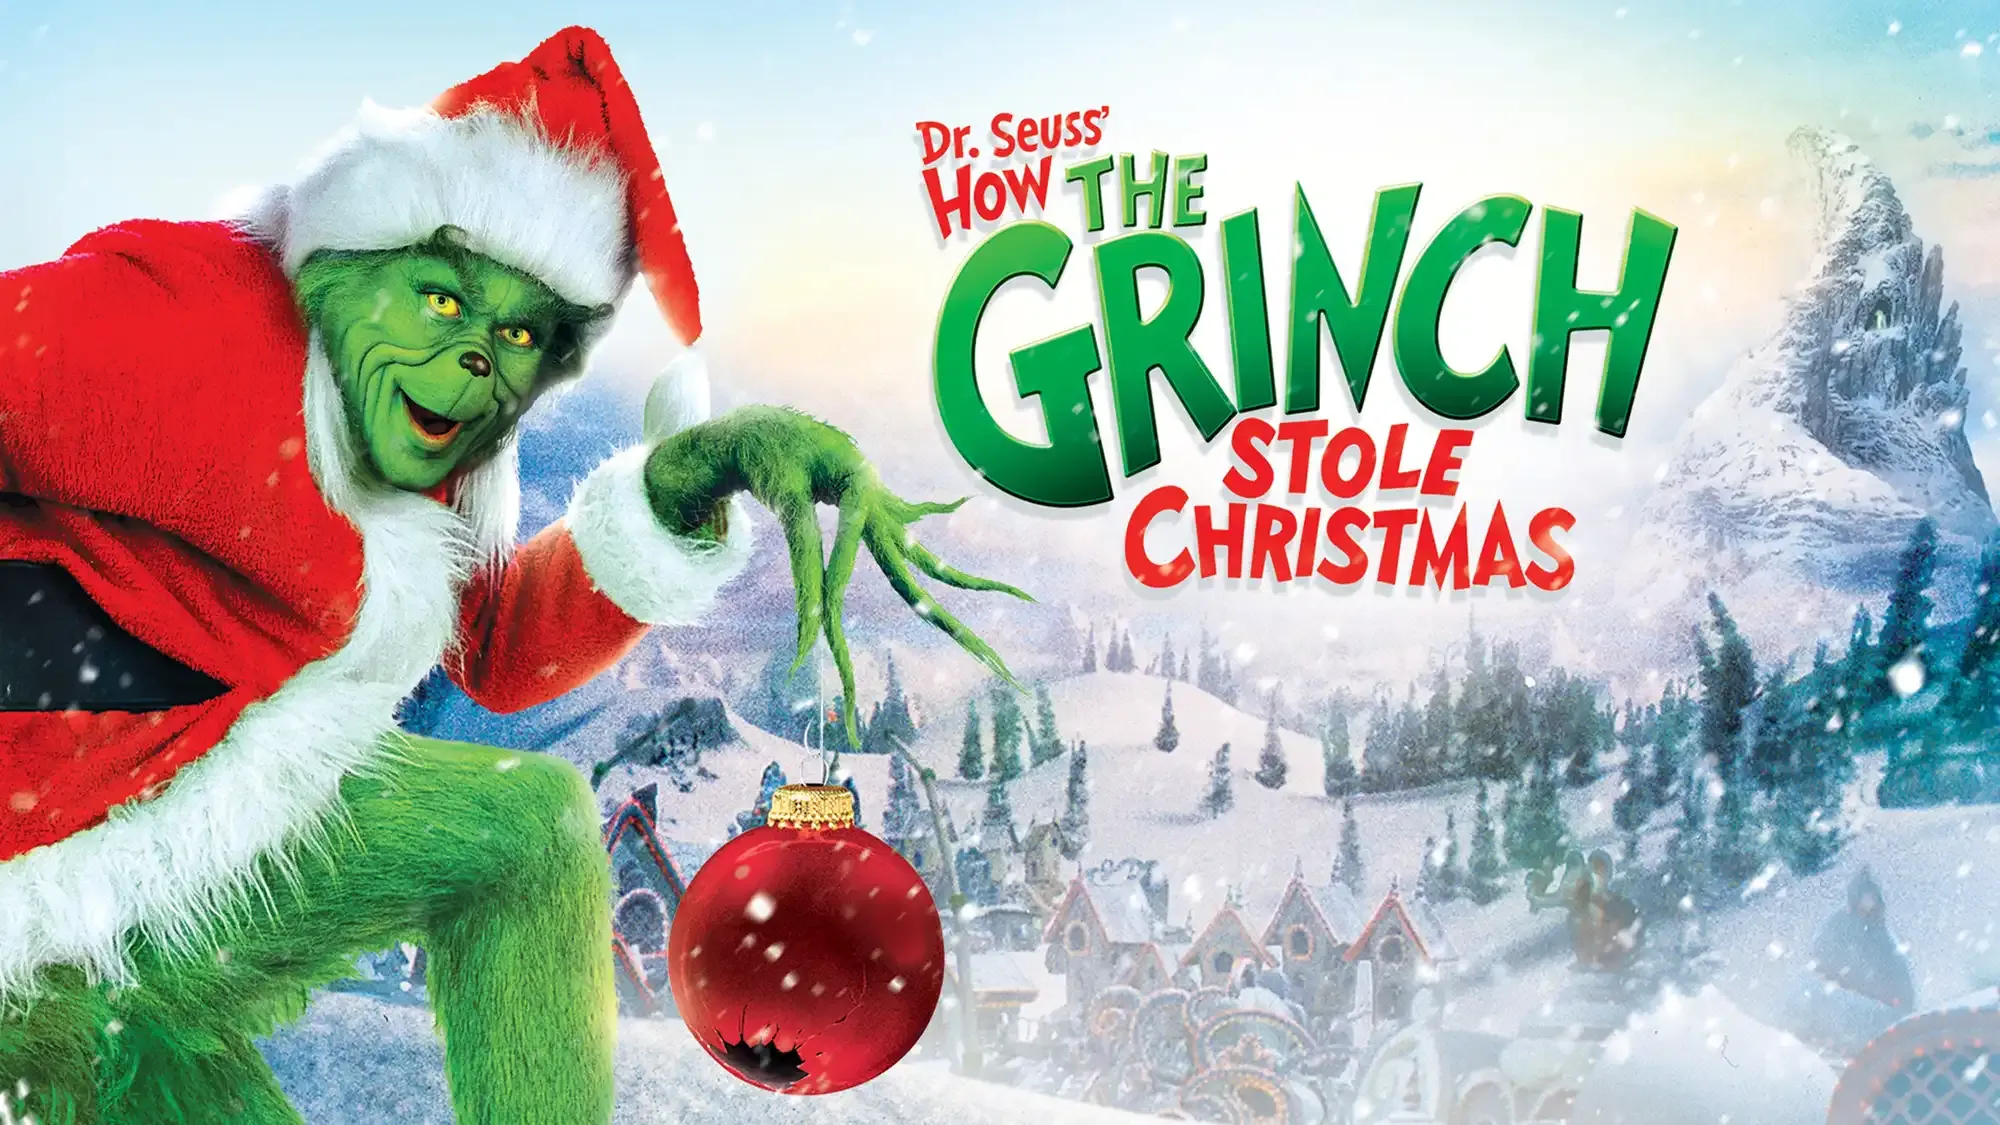 How the Grinch Stole Christmas movie review